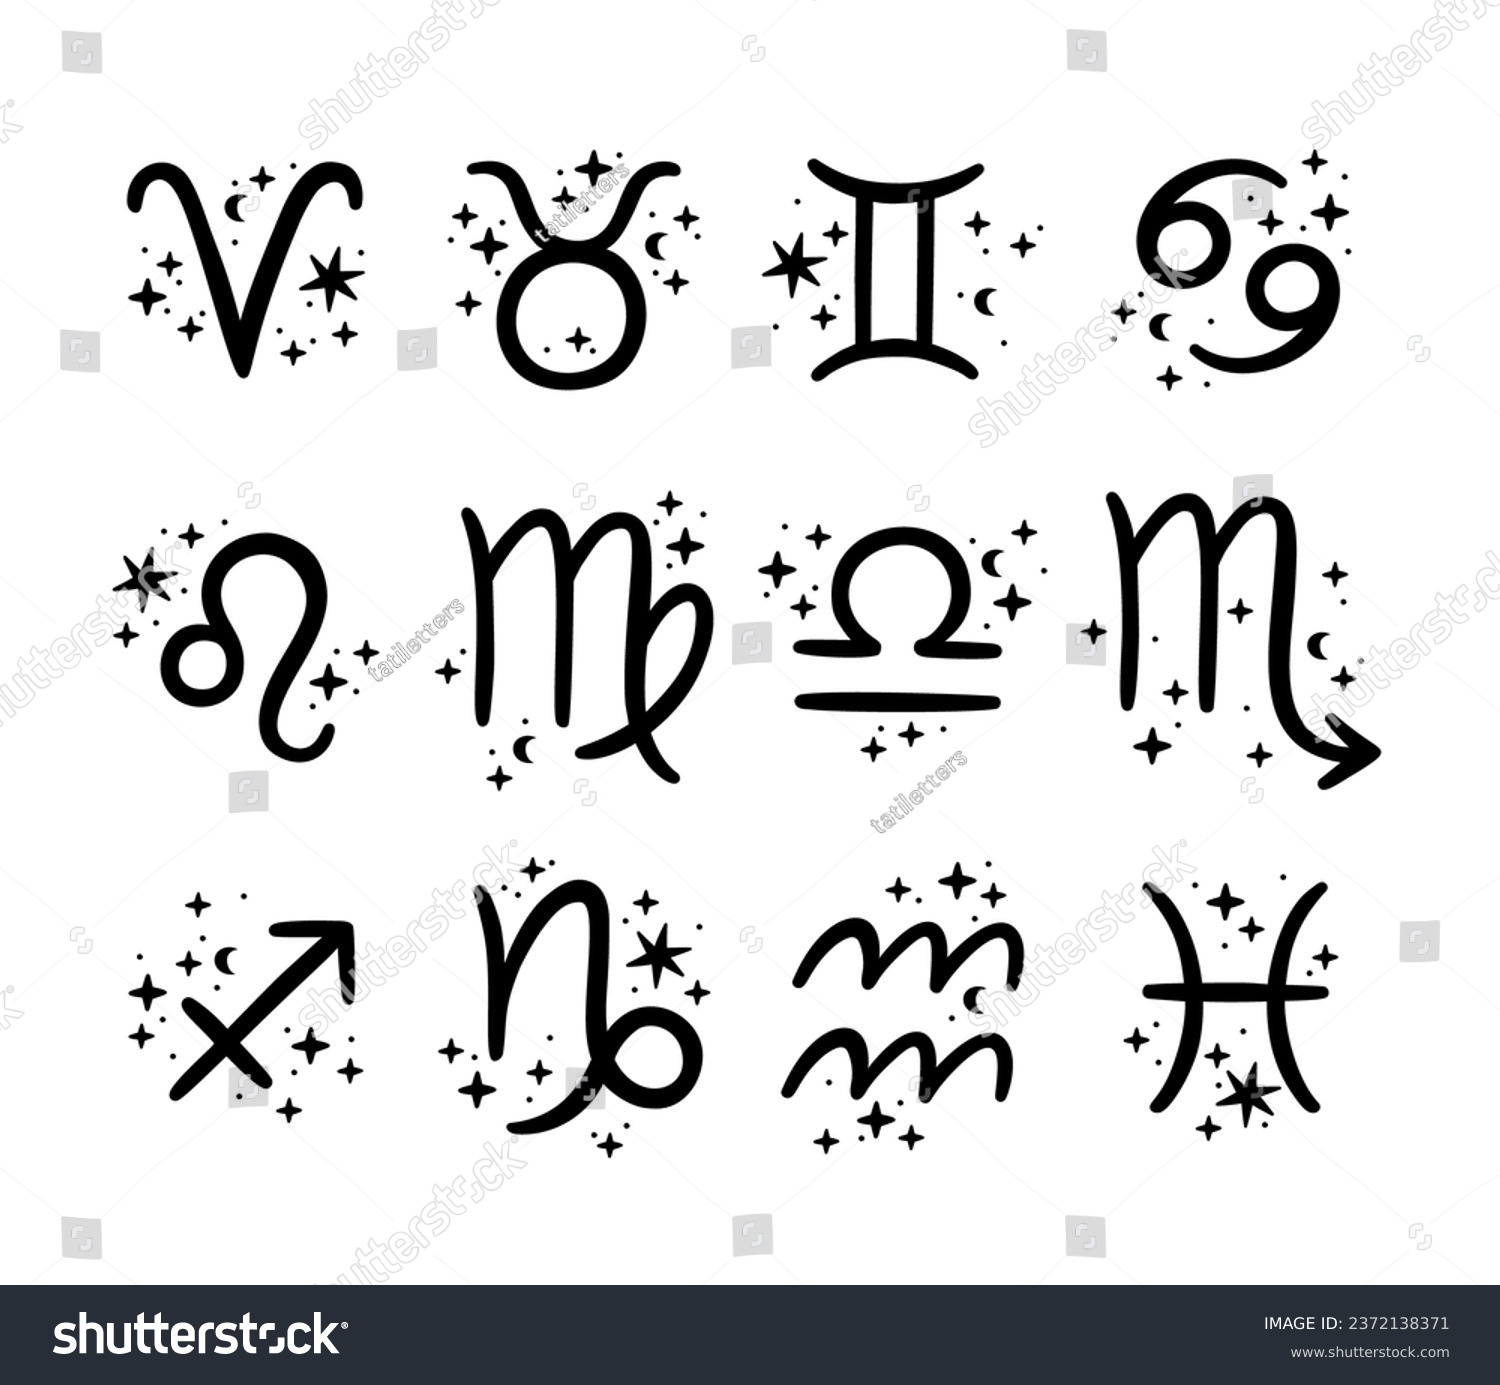 SVG of Cute Zodiac sign collection black and white. Astrology icon Virgo simple illustration, Libra clipart, Horoscope celestial set. svg